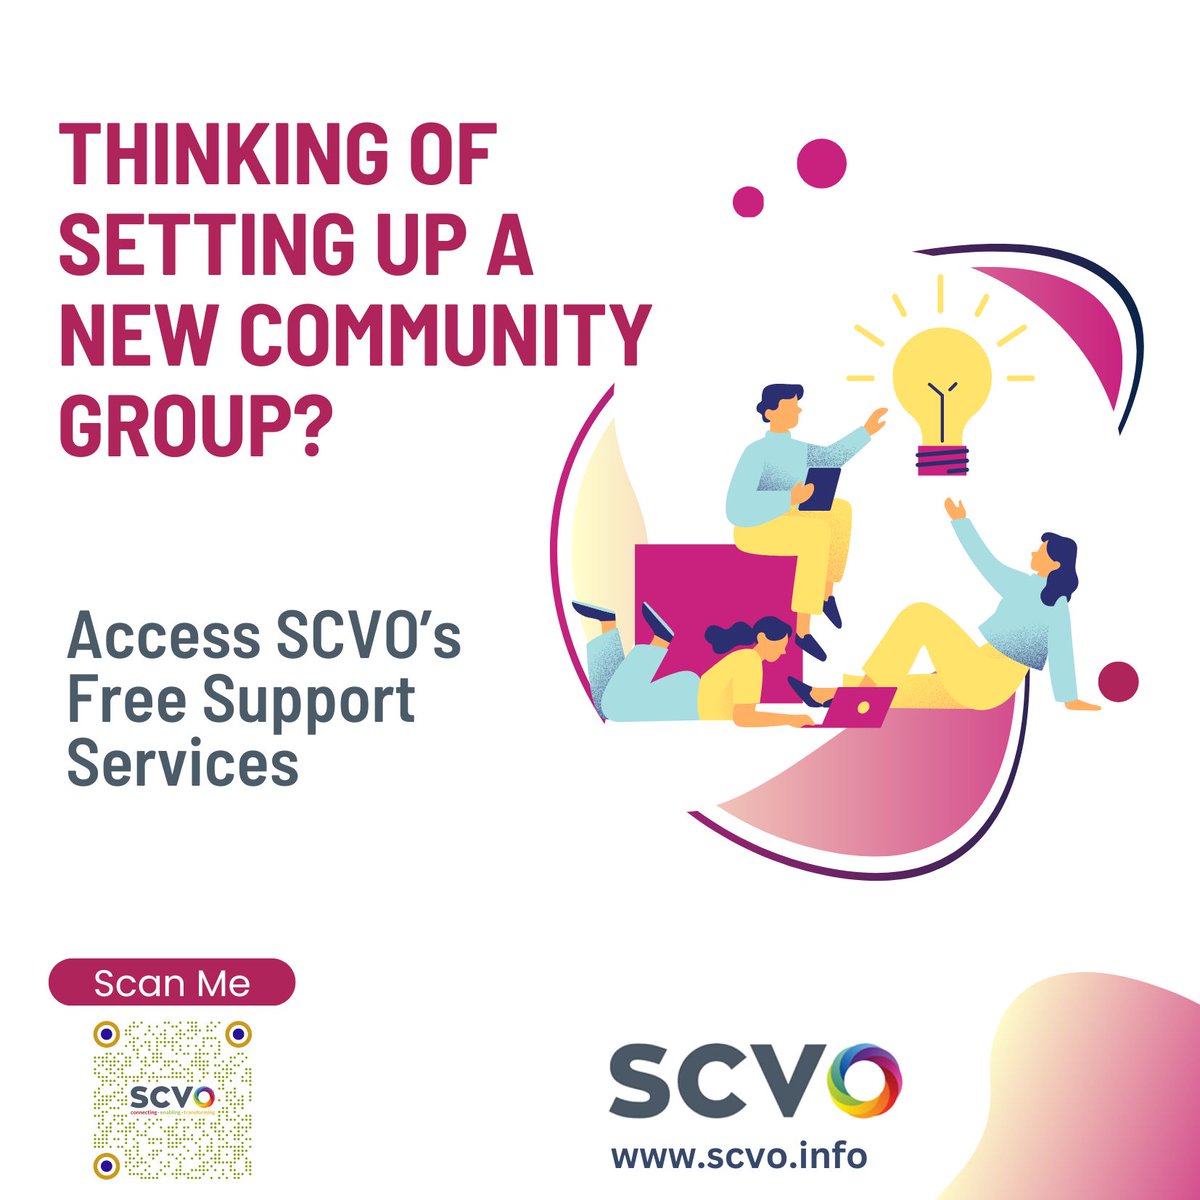 Did you know SCVO’s experienced Capacity Development Team can help you to set up a new organisation and find the right legal structure for you? Find out more by visiting: scvo.info